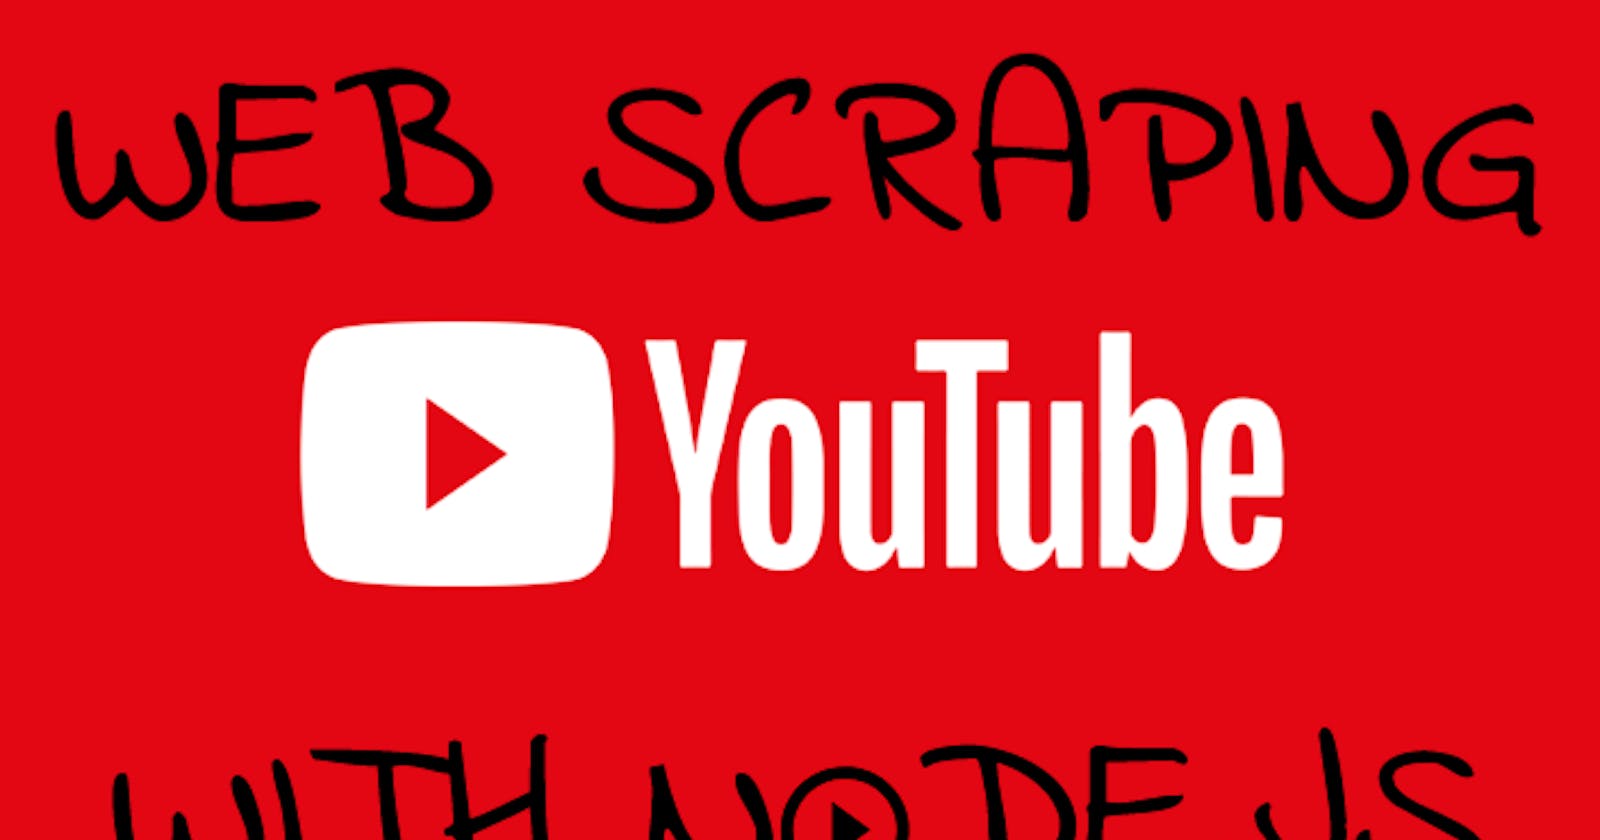 Web scraping YouTube search video results with Nodejs